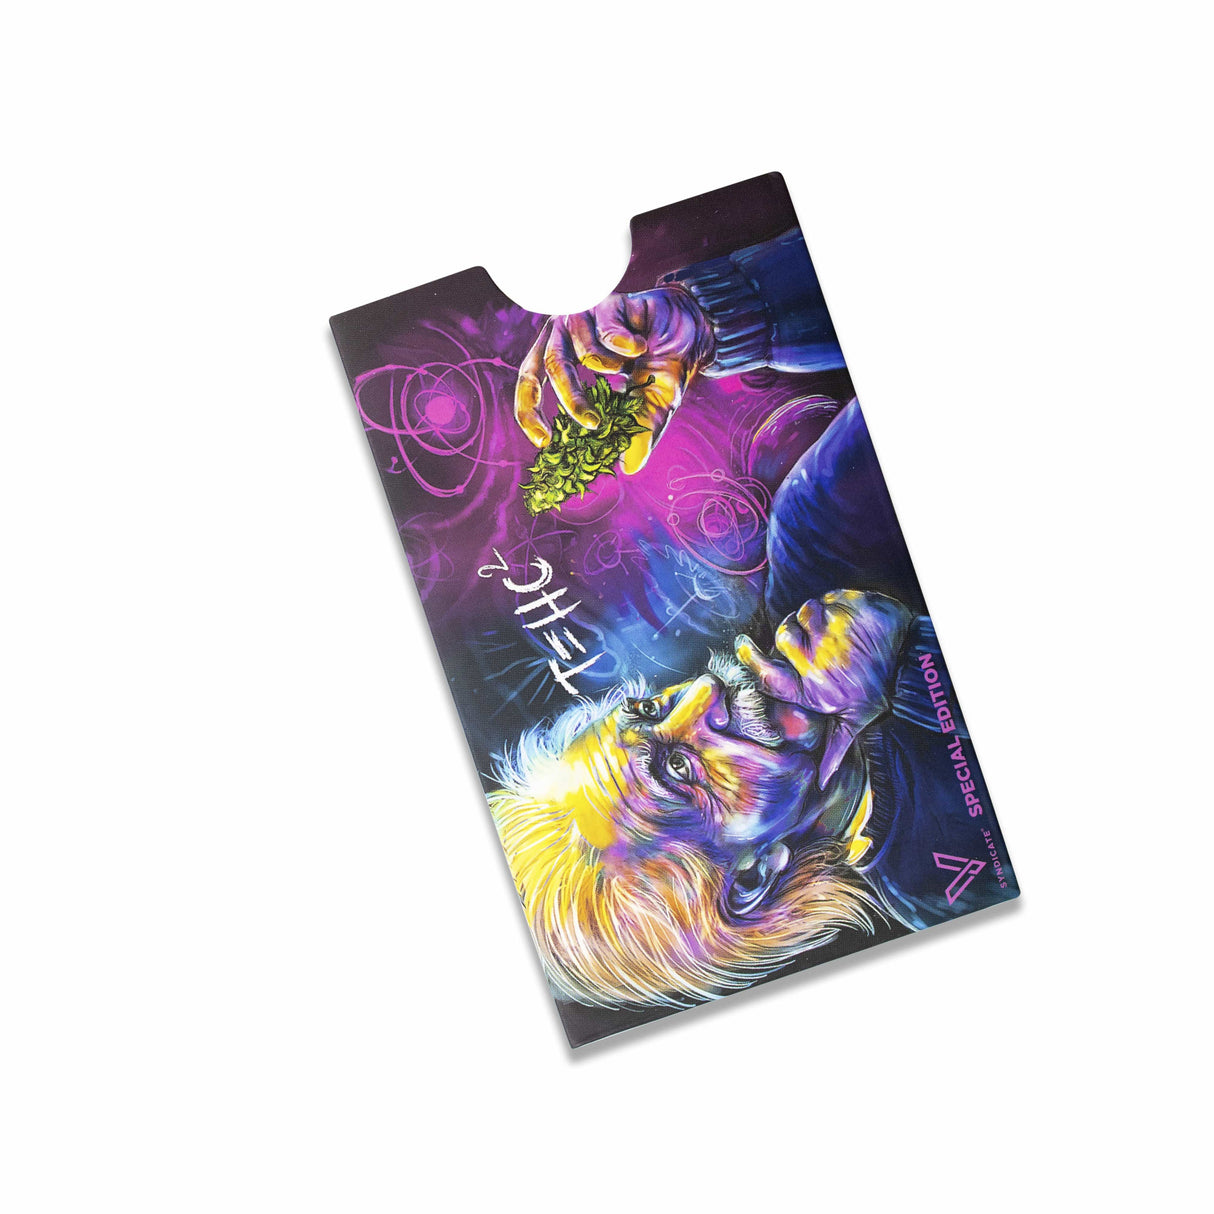 V Syndicate T=HC2 Einstein Grinder Card in vibrant colors, compact and portable design